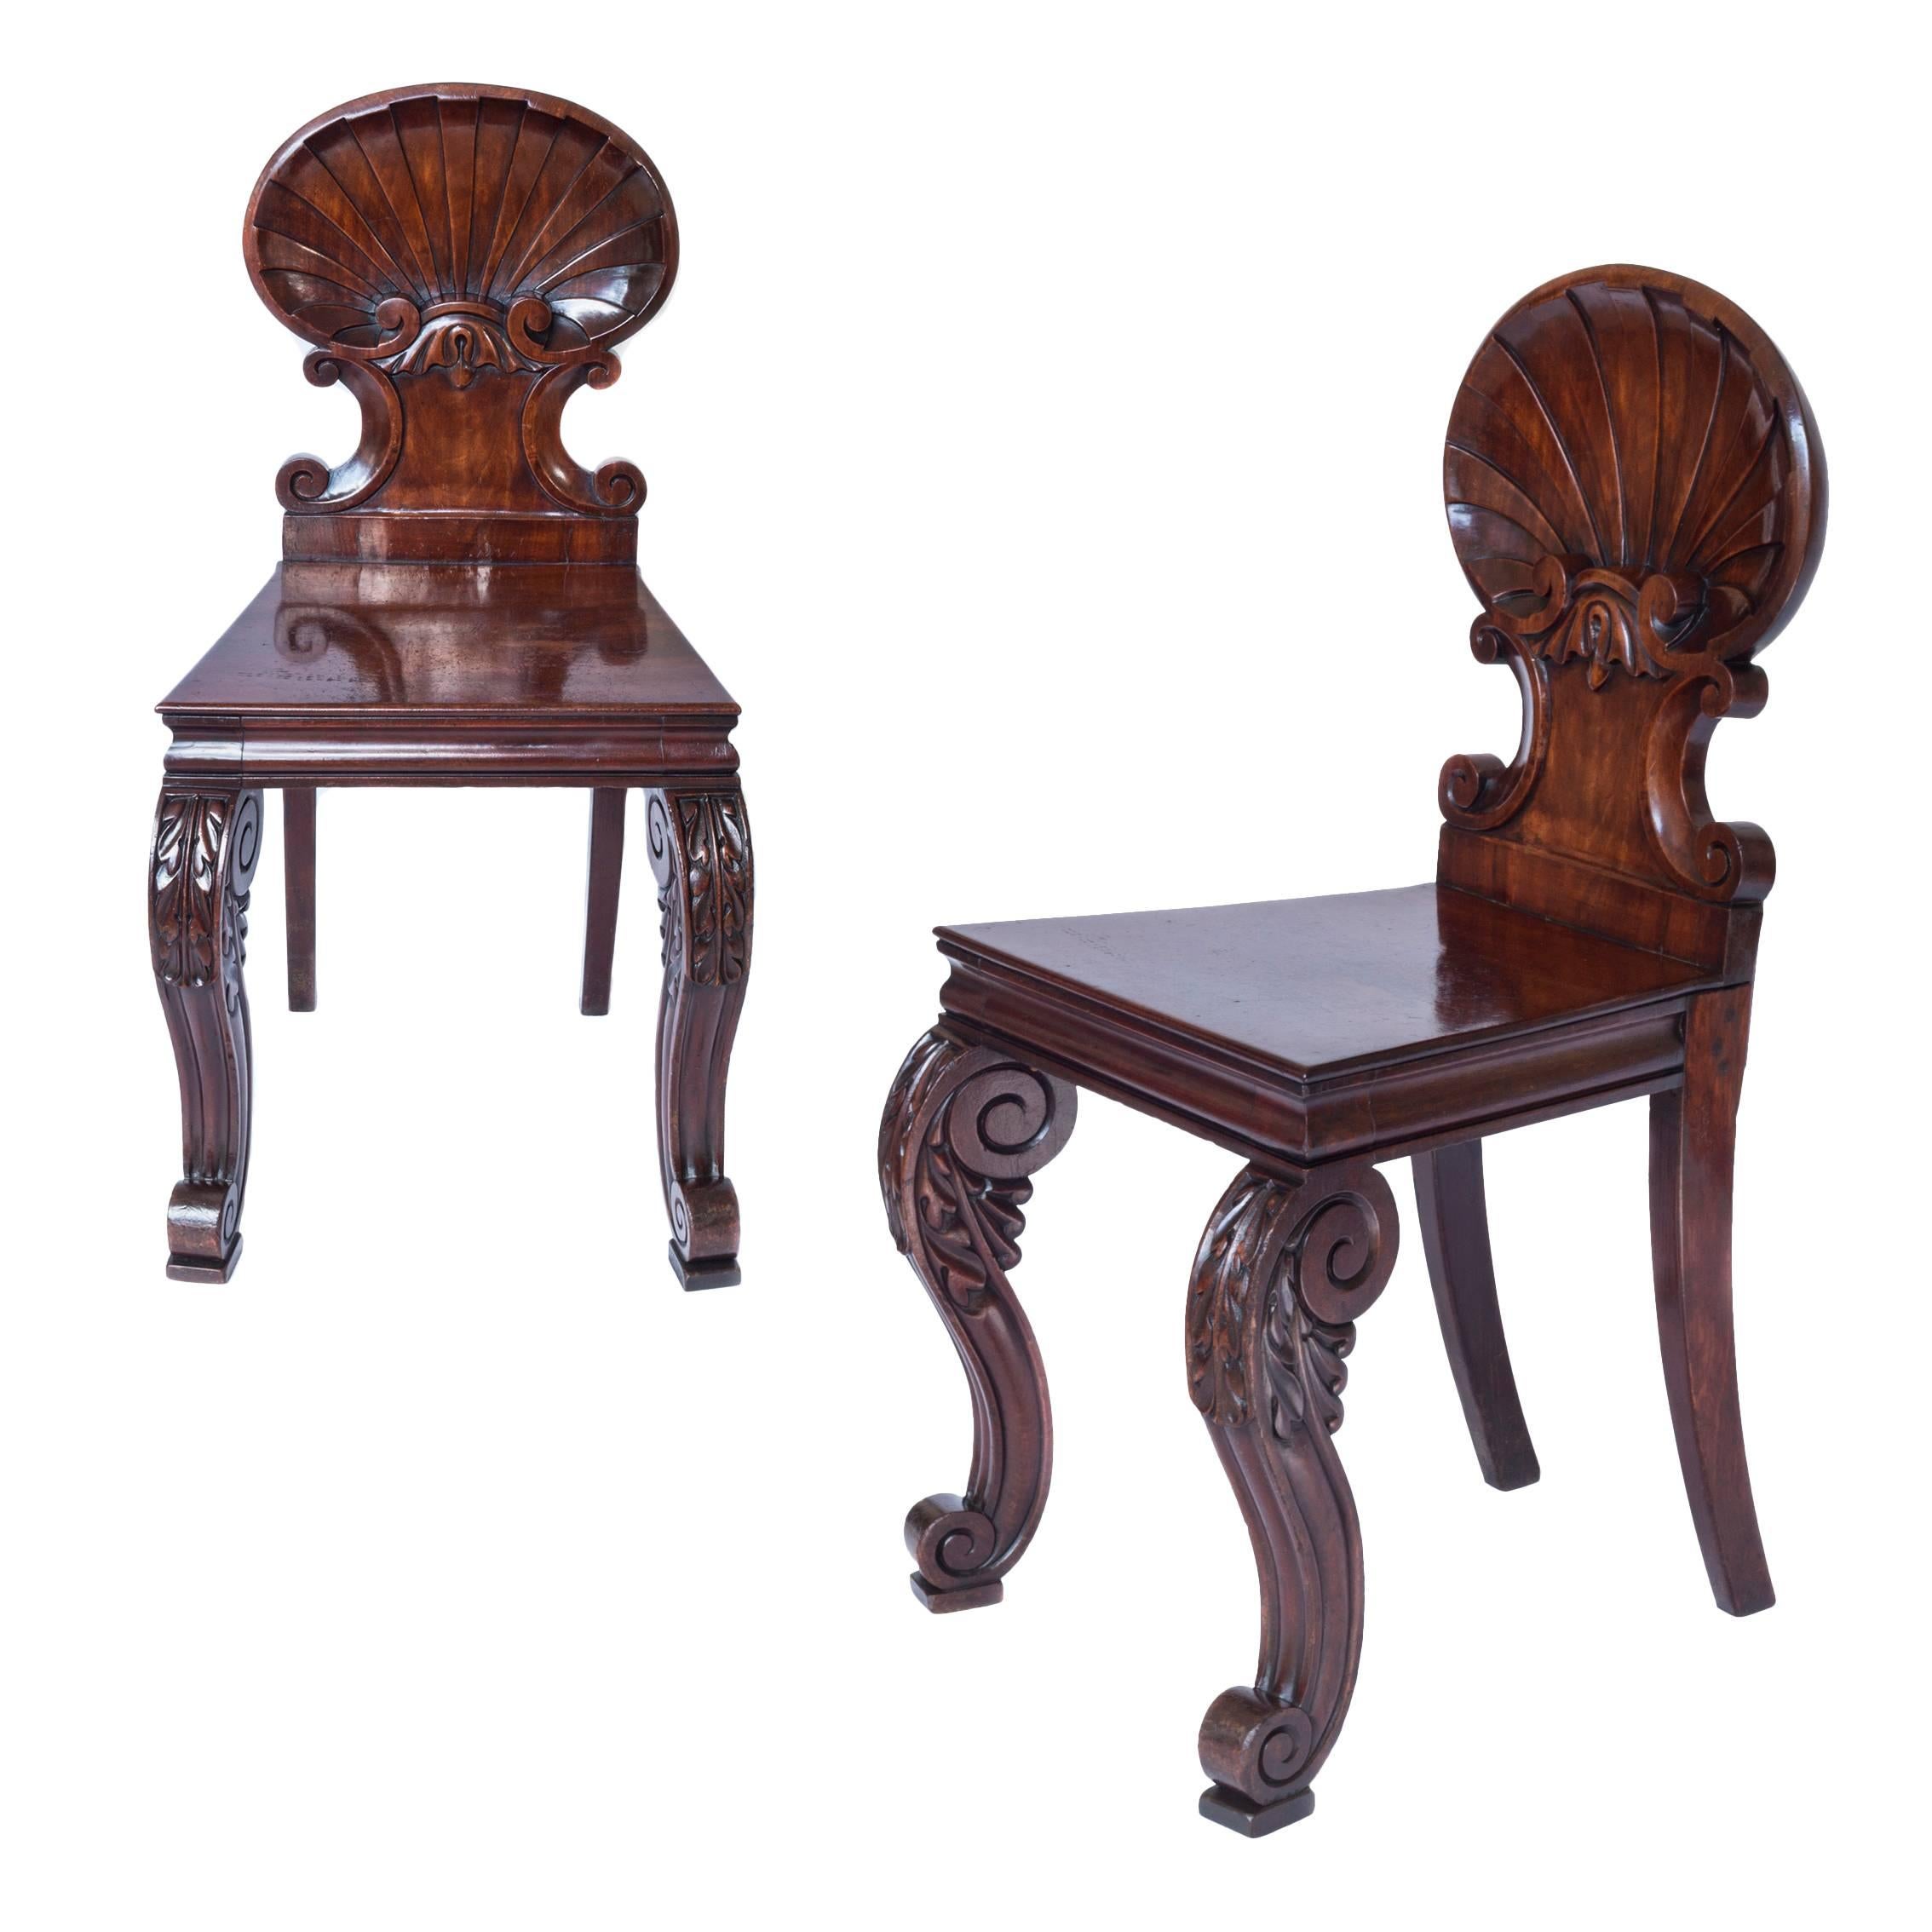 Irish 19th Century Pair of Architectural Hall Chairs with Shell Backs